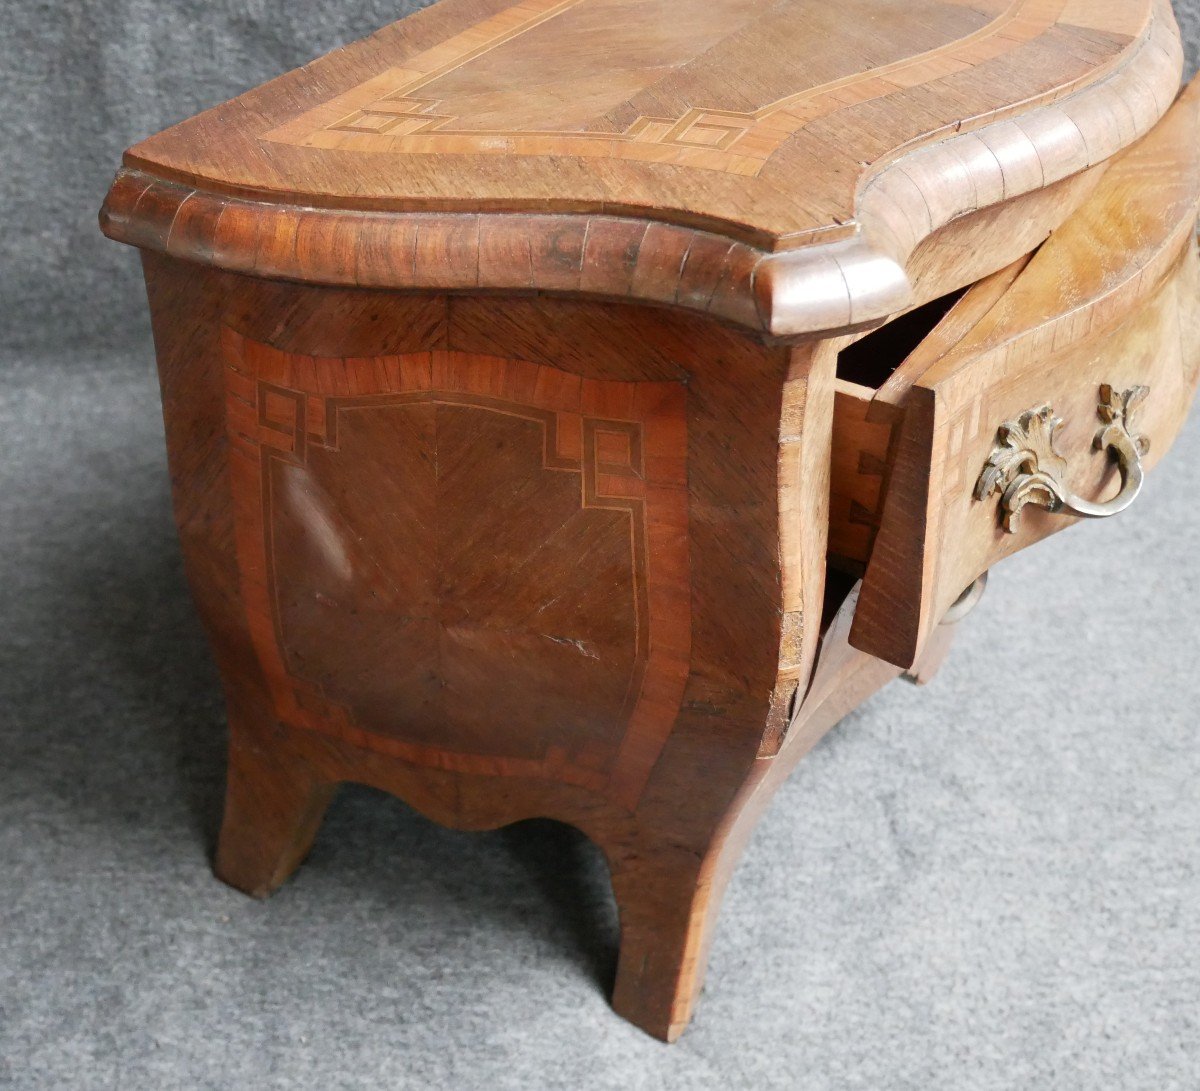 Miniature Commode In Wood And Wood Veneer, Louis XV Style, Master Work, 19th Century-photo-1